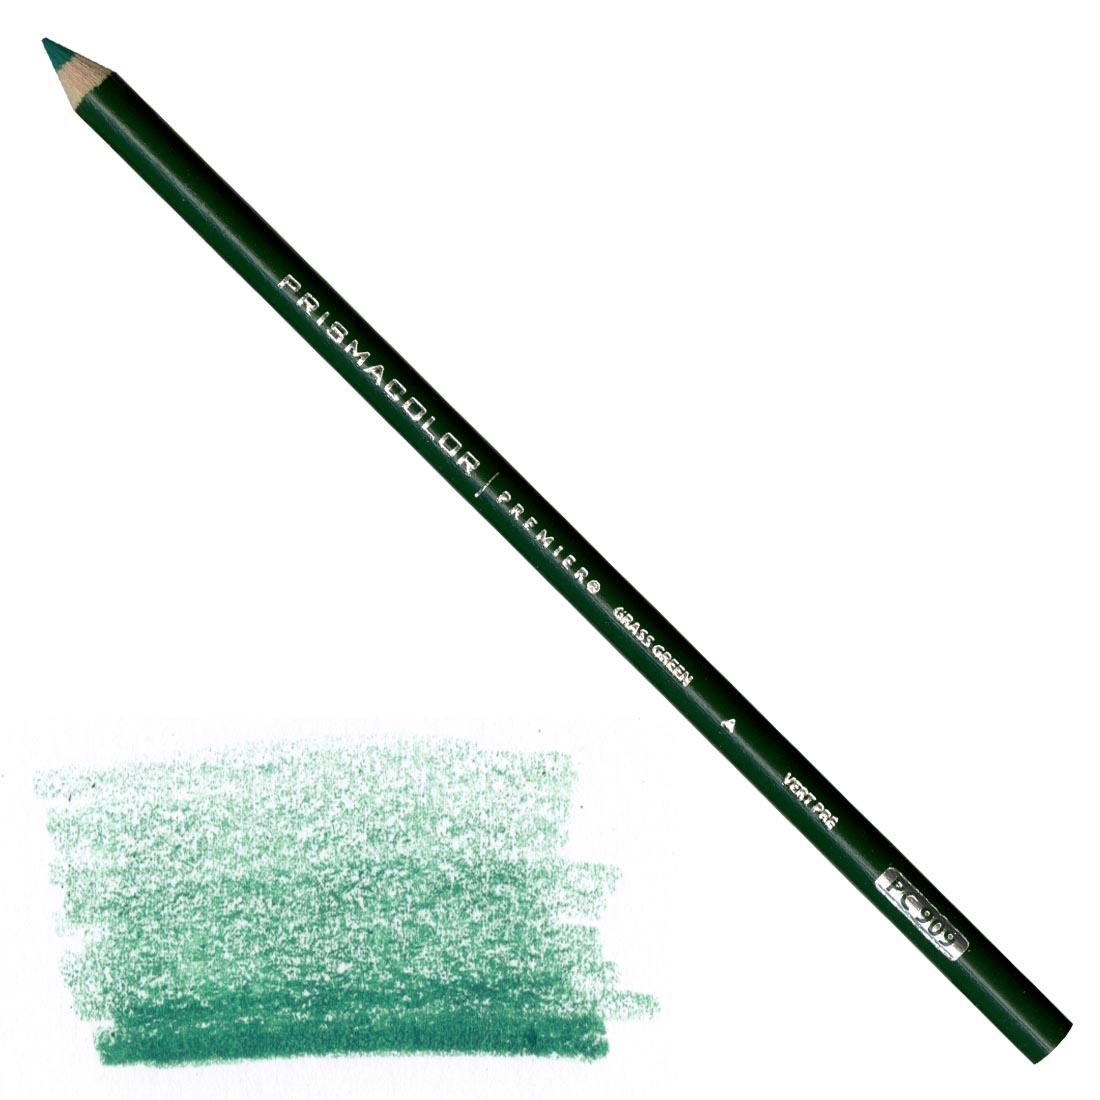 Grass Green Prismacolor Premier Colored Pencil with a sample colored swatch